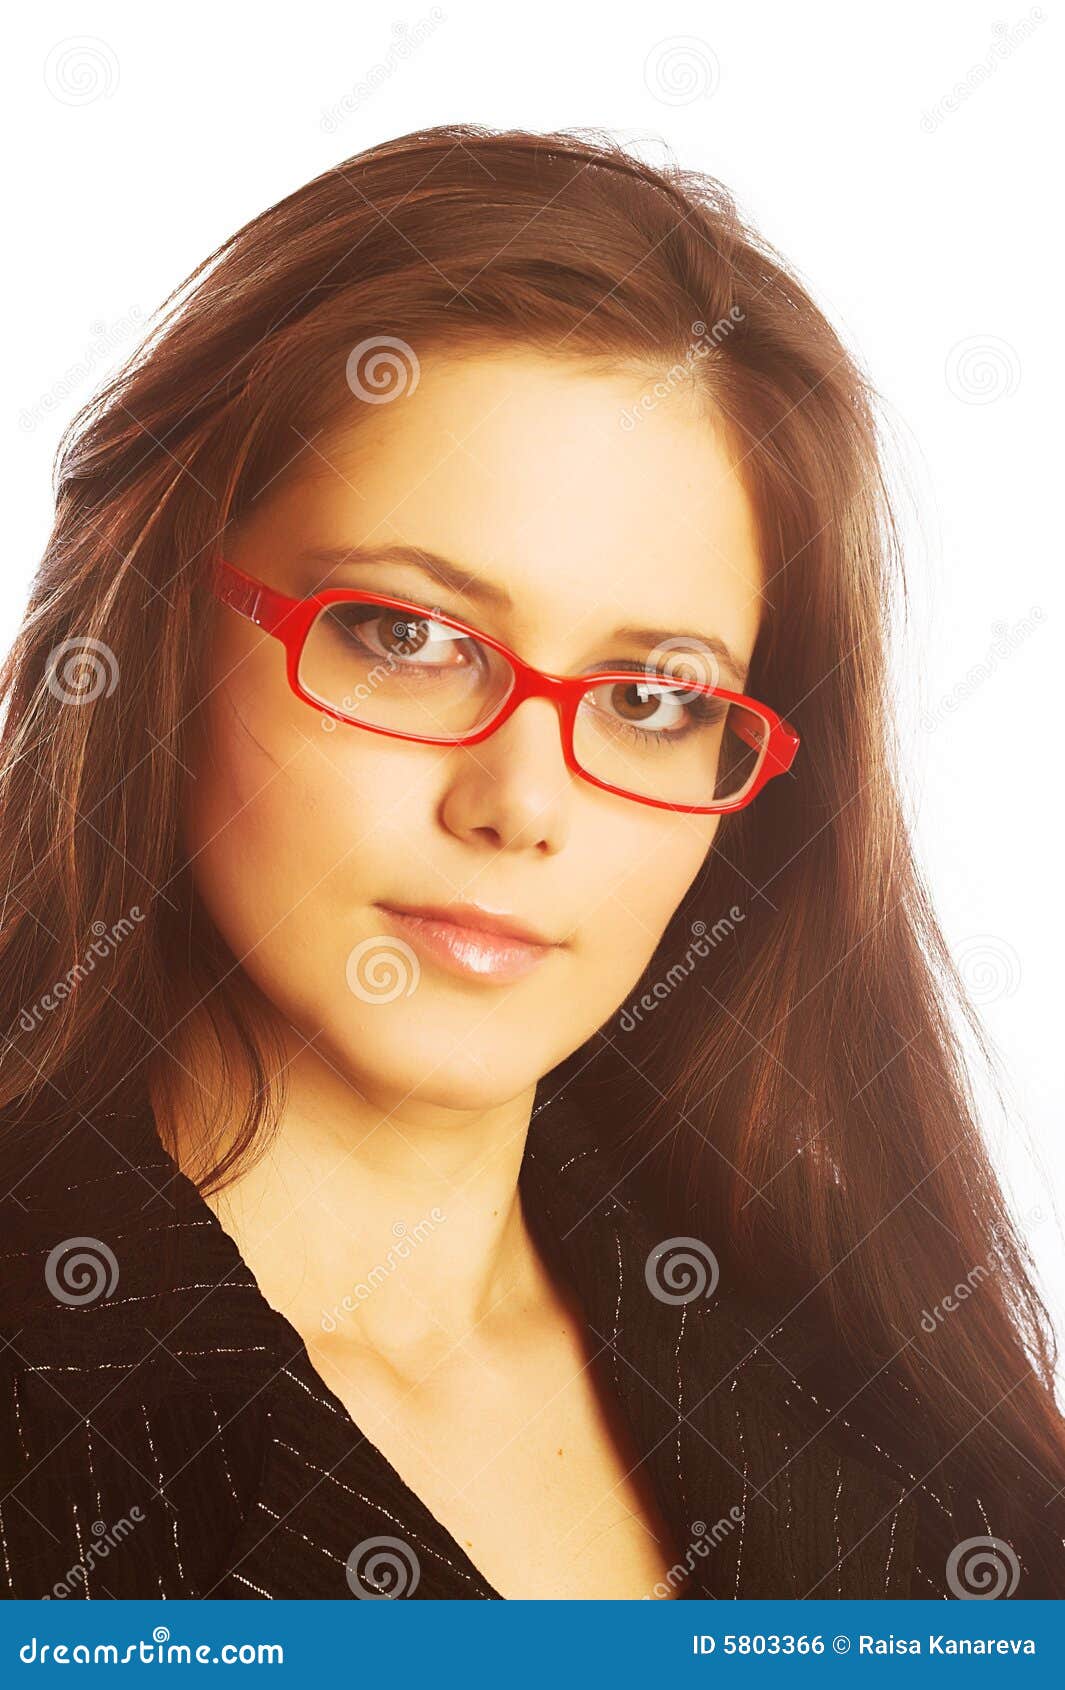 Beautiful Woman In Glasses Royalty Free Stock Image